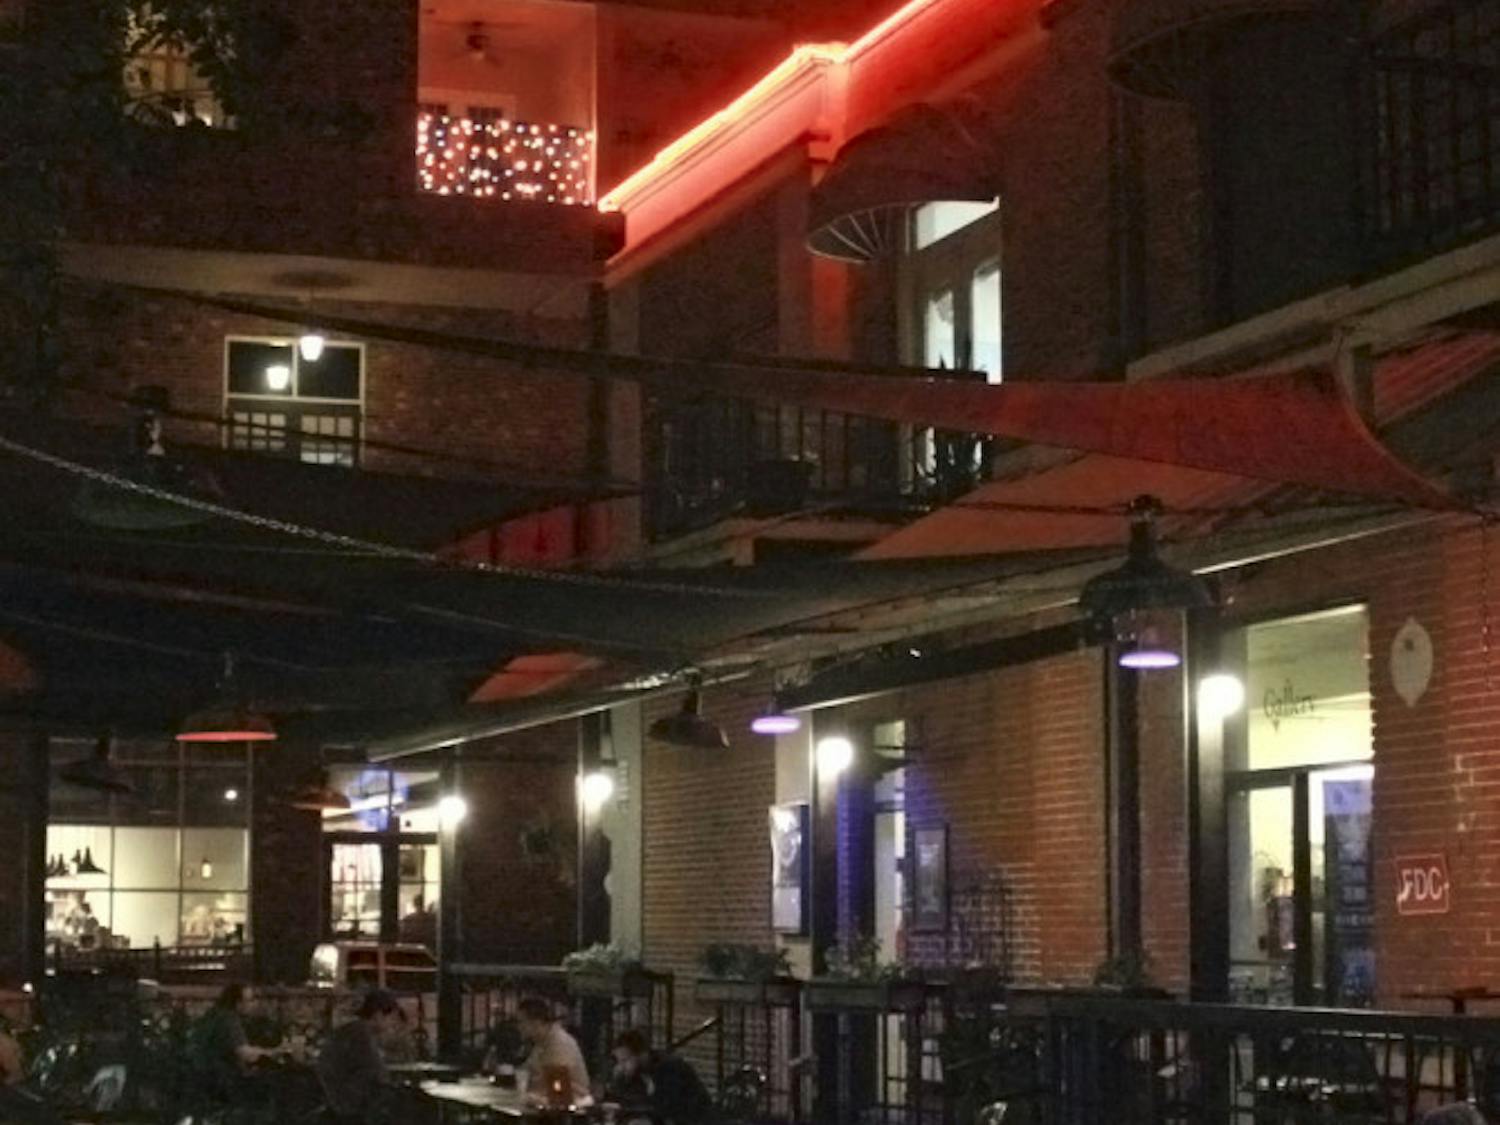 Patrons eat and drink outside Maude’s Classic Cafe at Sun Center in downtown Gainesville on Nov. 29, 2015. Holiday lights adorned apartments above and temperatures approached a low of 57 degrees.